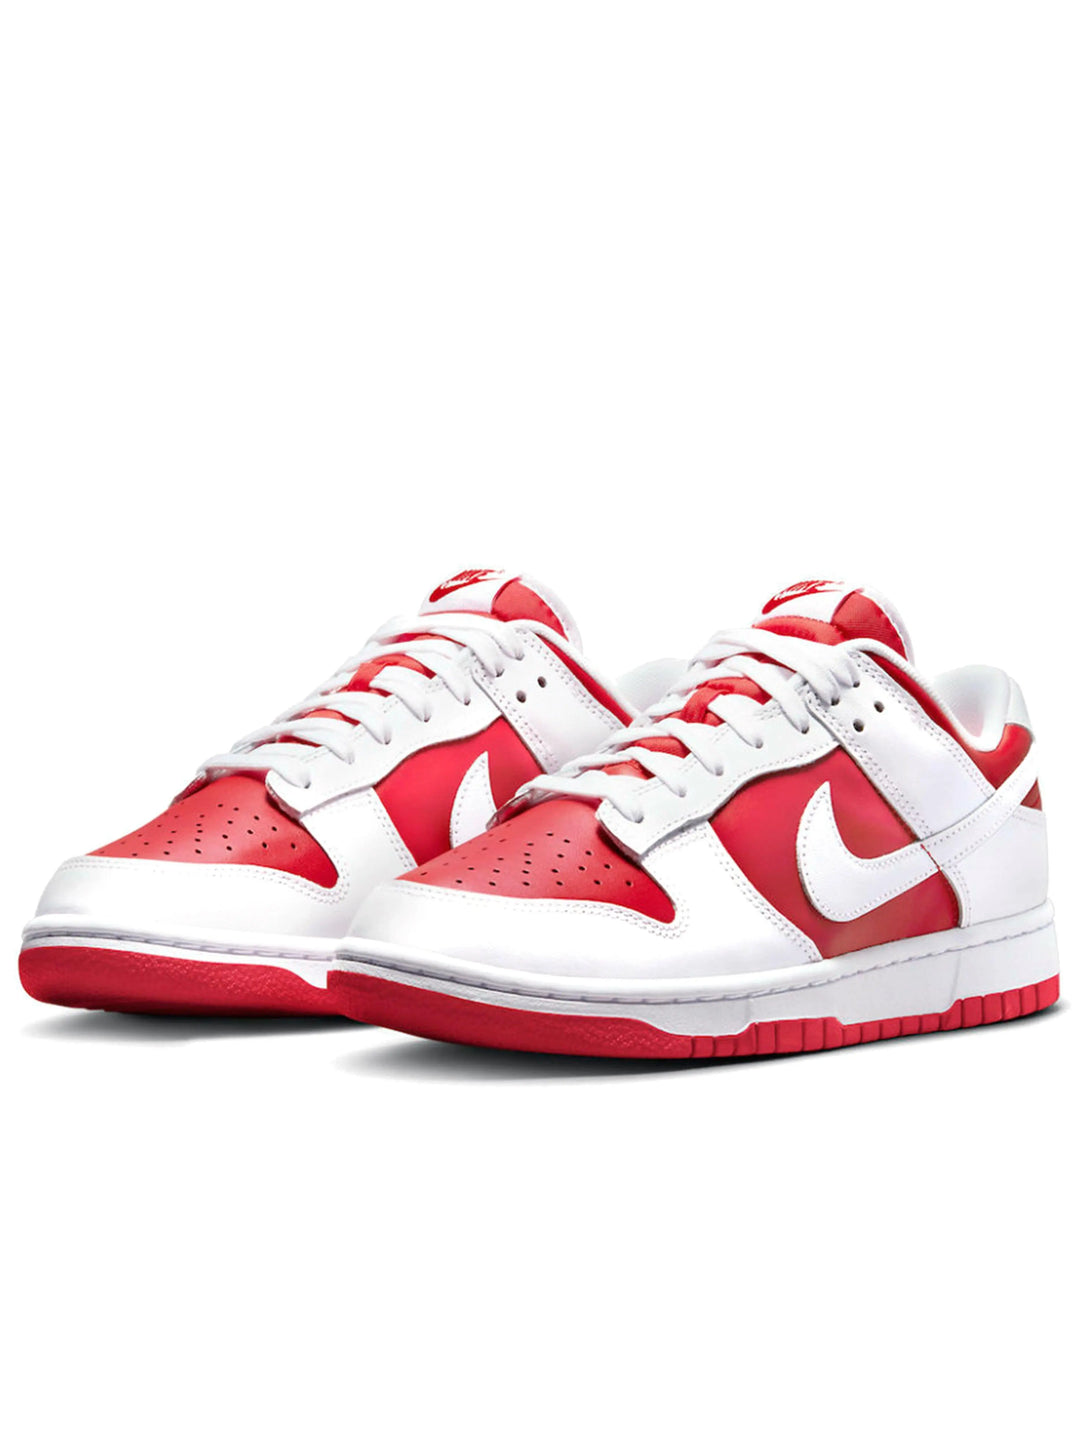 Nike Dunk Low Championship Red Prior